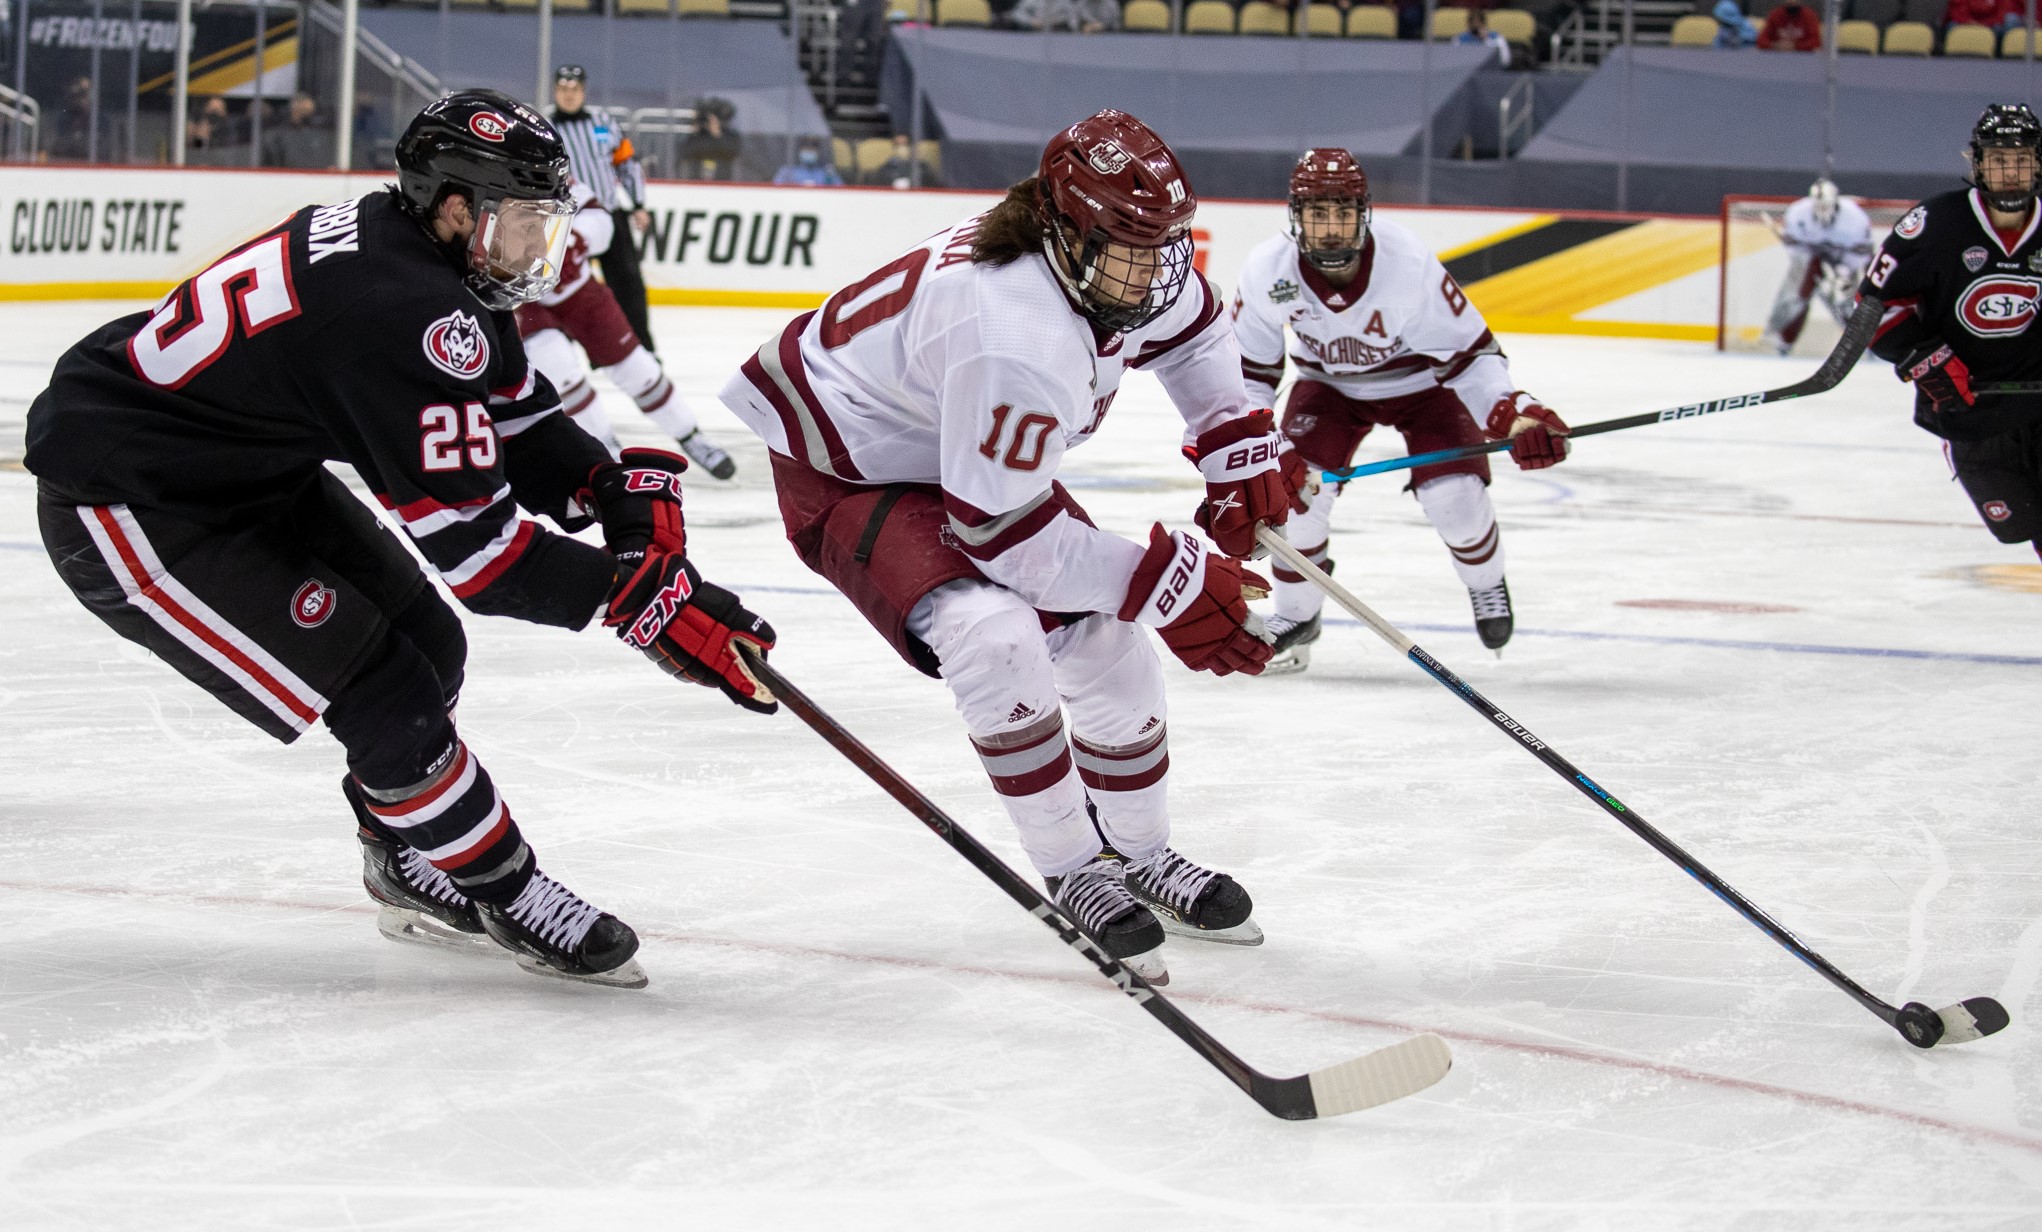 State of Hockey tops both men's, women's Division I polls - Bring